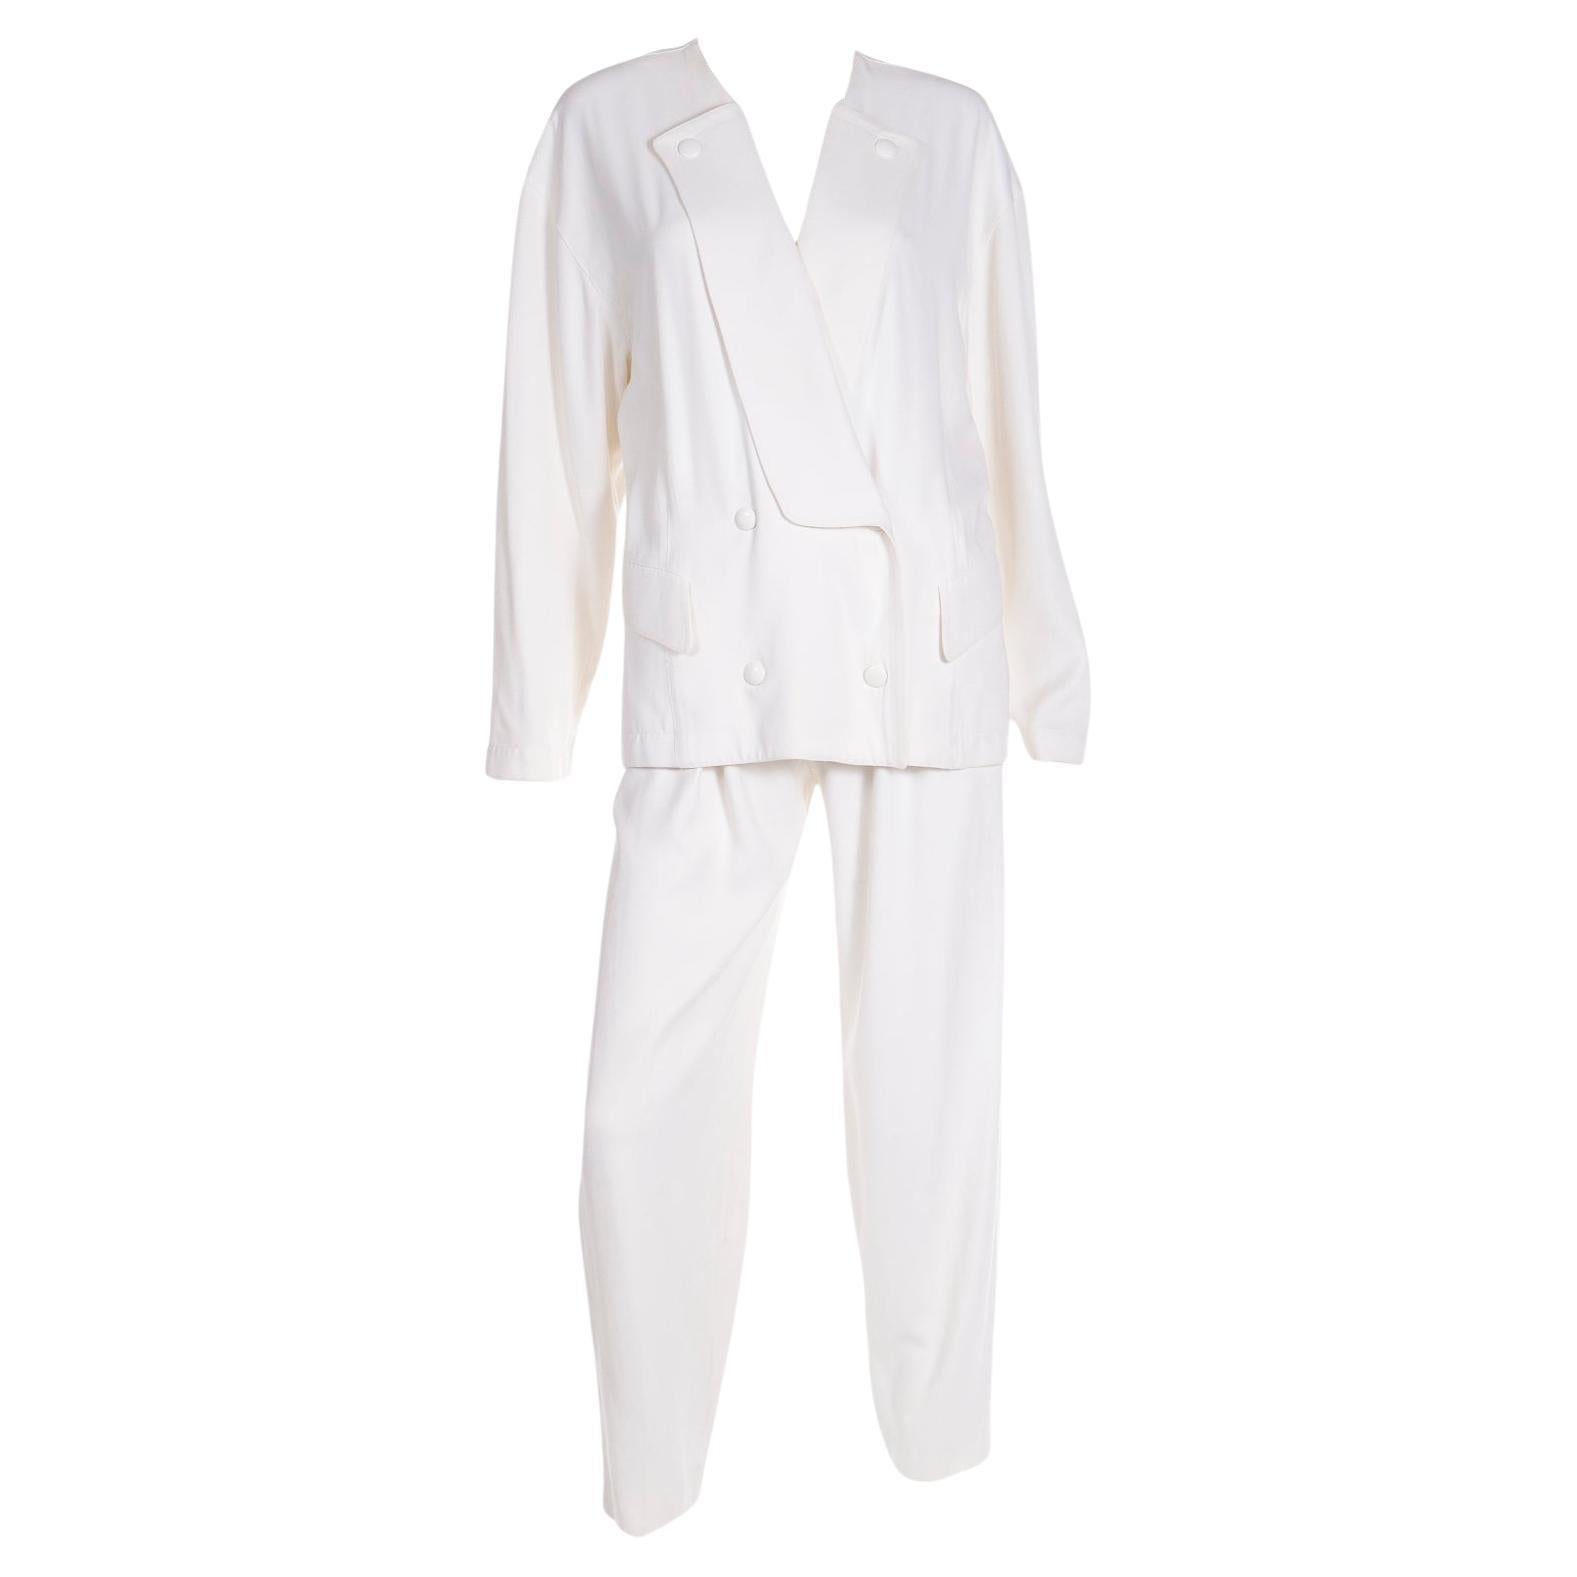 Thierry Mugler Vintage White 2 Pc Suit Jacket & Trousers Outfit  For Sale